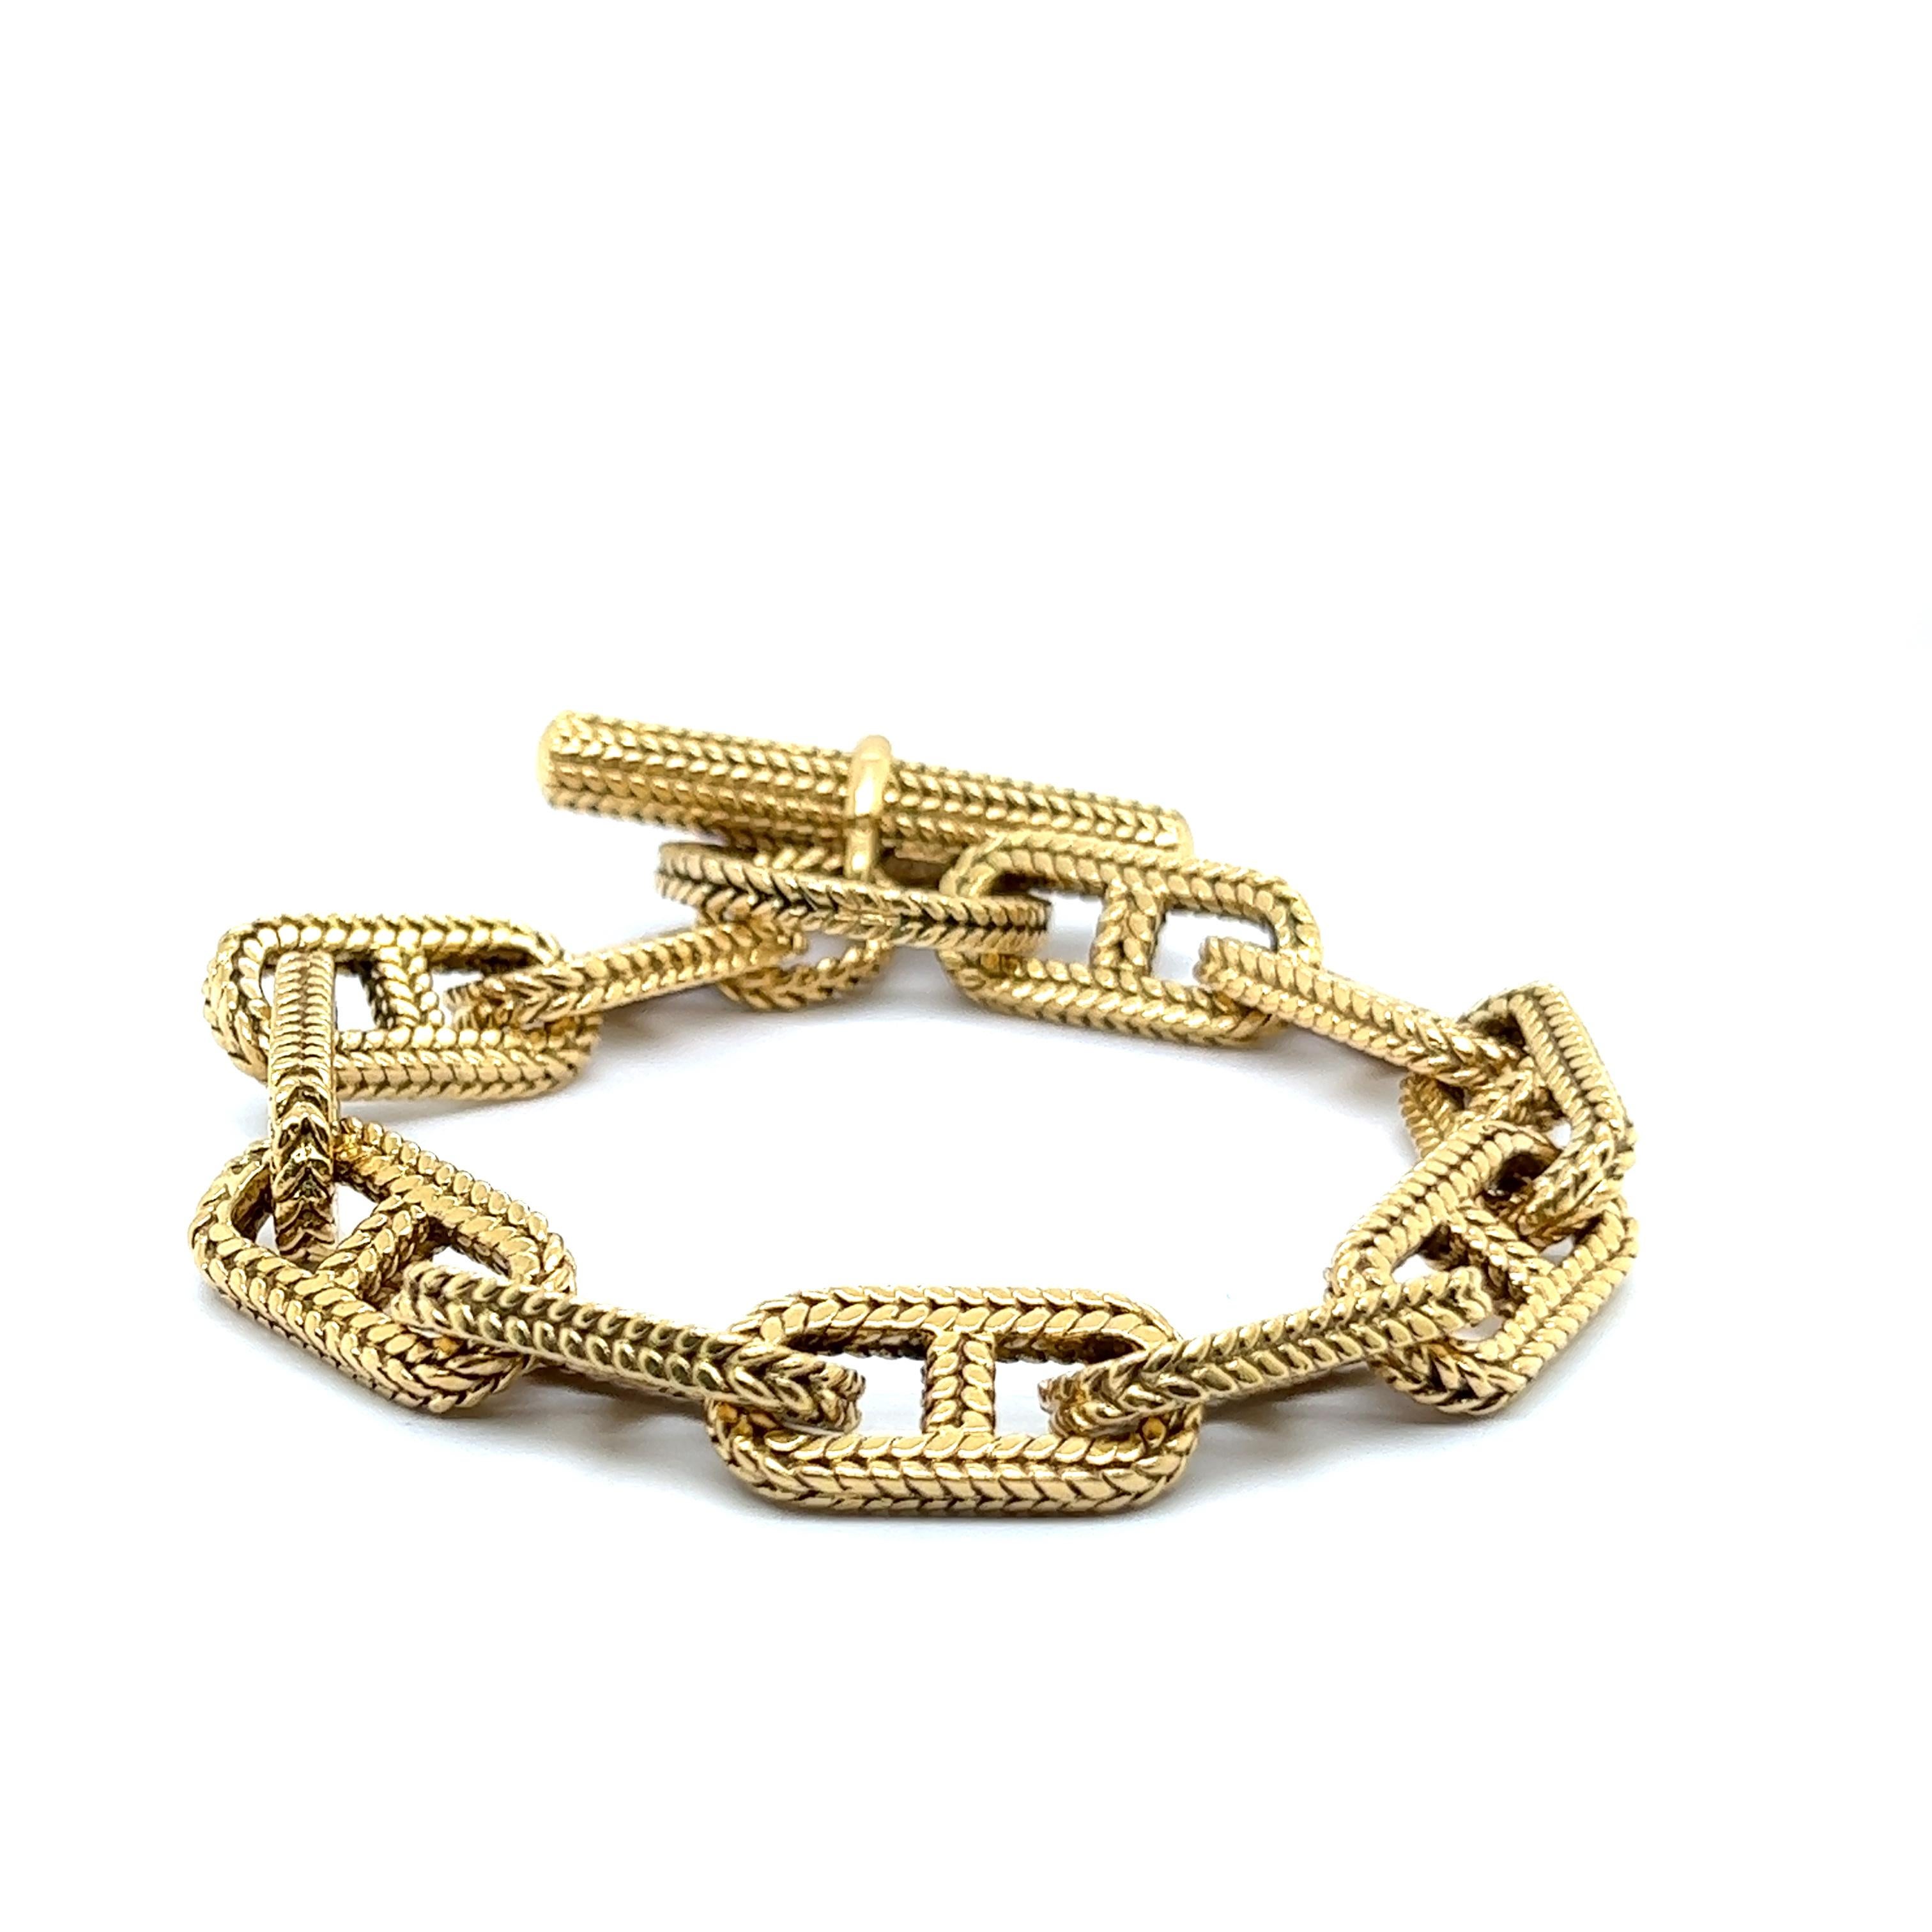 Exquisite gold bracelet, inspired by the iconic 